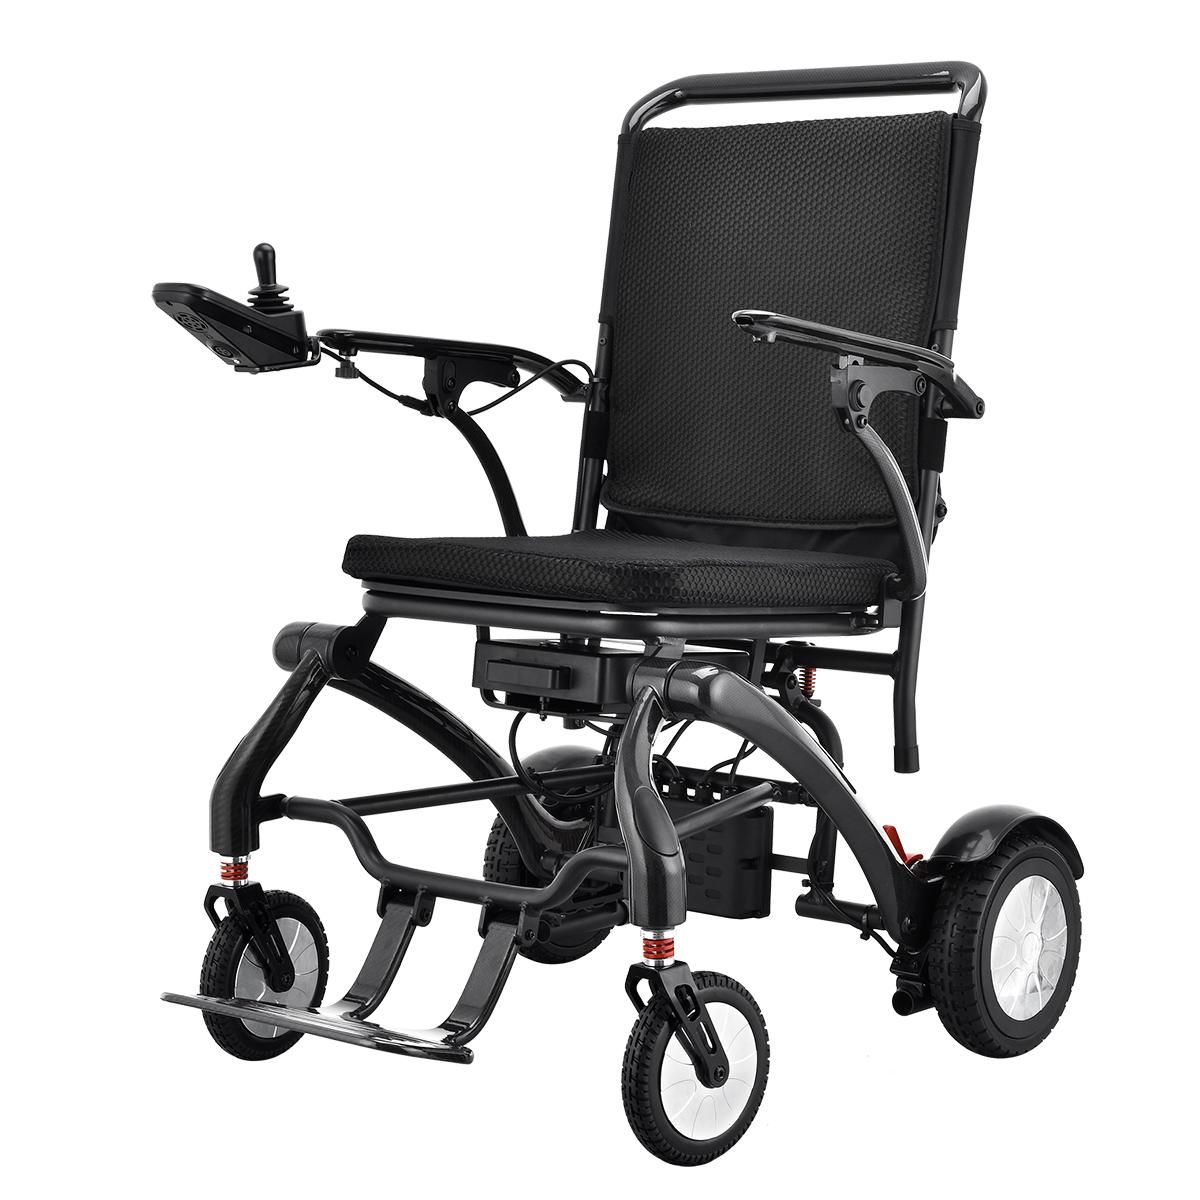 Exactly how to use lightweight carbon fiber wheelchair properly?